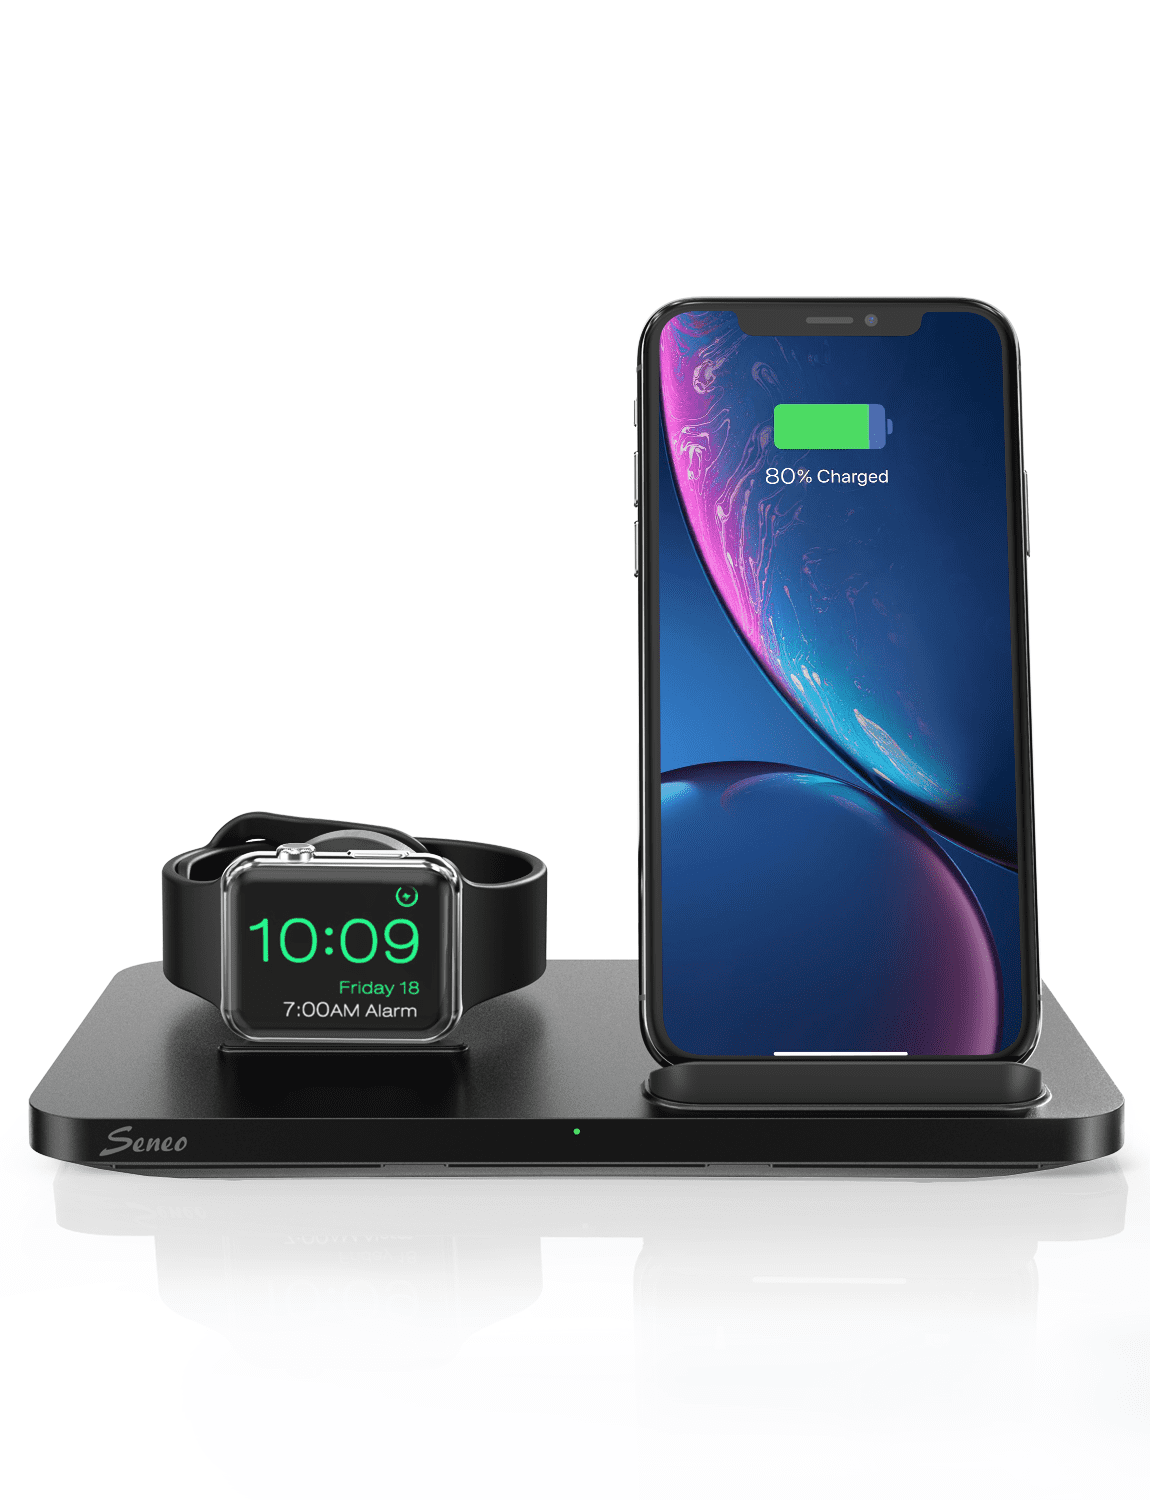 Wireless Charger 7.5W Qi Fast Charger for iPhone 11/11 Pro Max/XR/XS Max/XS/X/8/8P Airpods 2 No iWatch Charging Cable Seneo 2 in 1 Dual Wireless Charging Pad with iWatch Stand for iWatch 5/4/3/2 